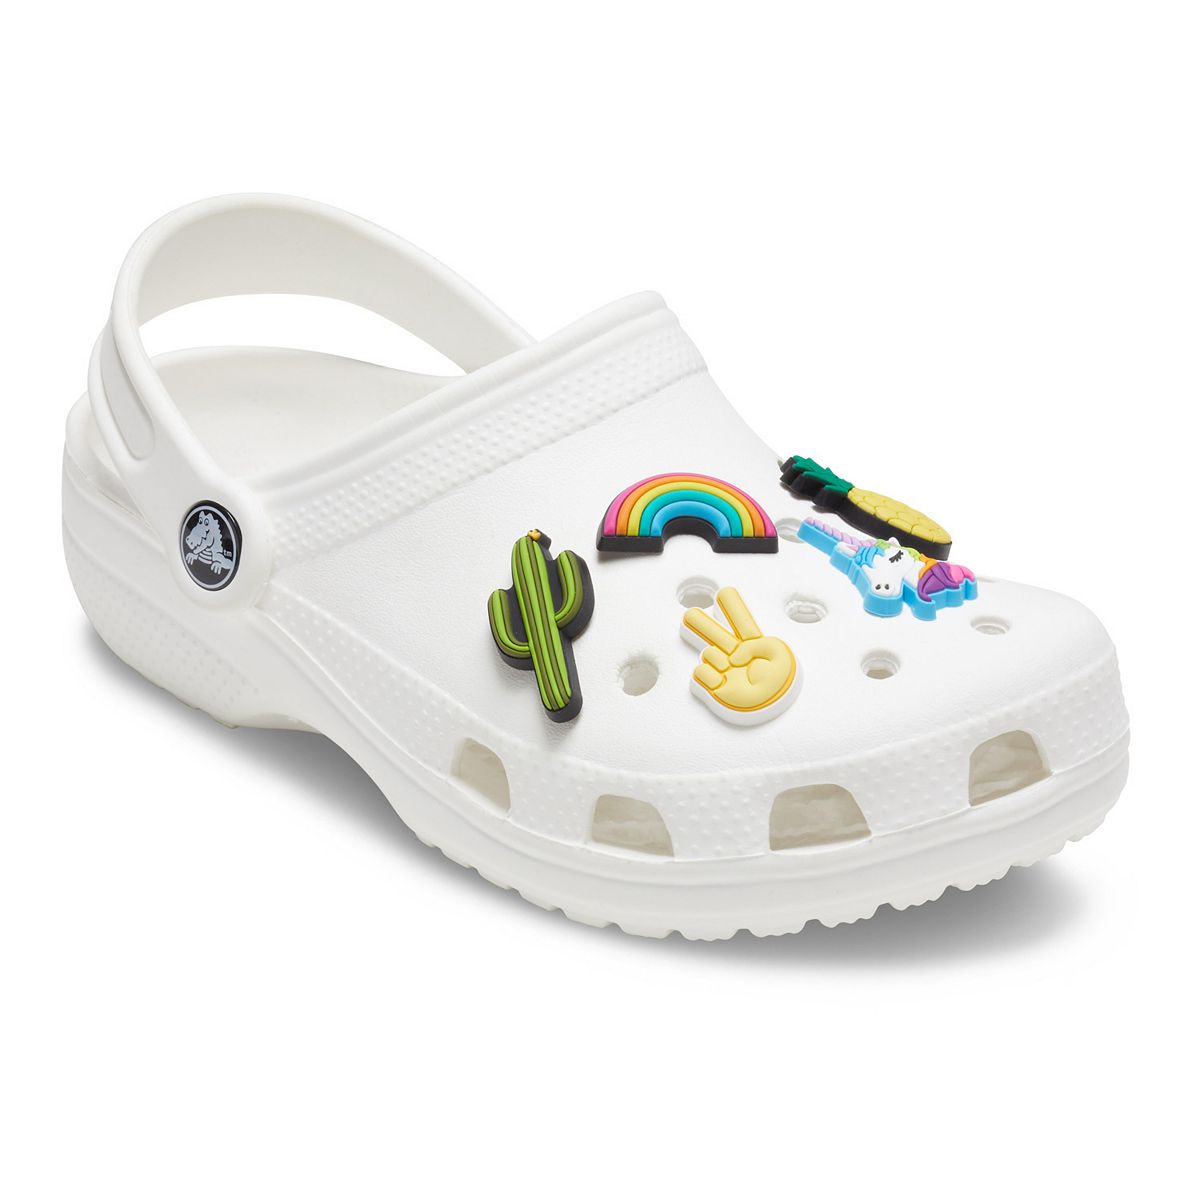 Actuator Medic pianist Crocs Jibbitz & Charms: Find Accessories for Your Pair of Crocs Footwear |  Kohl's